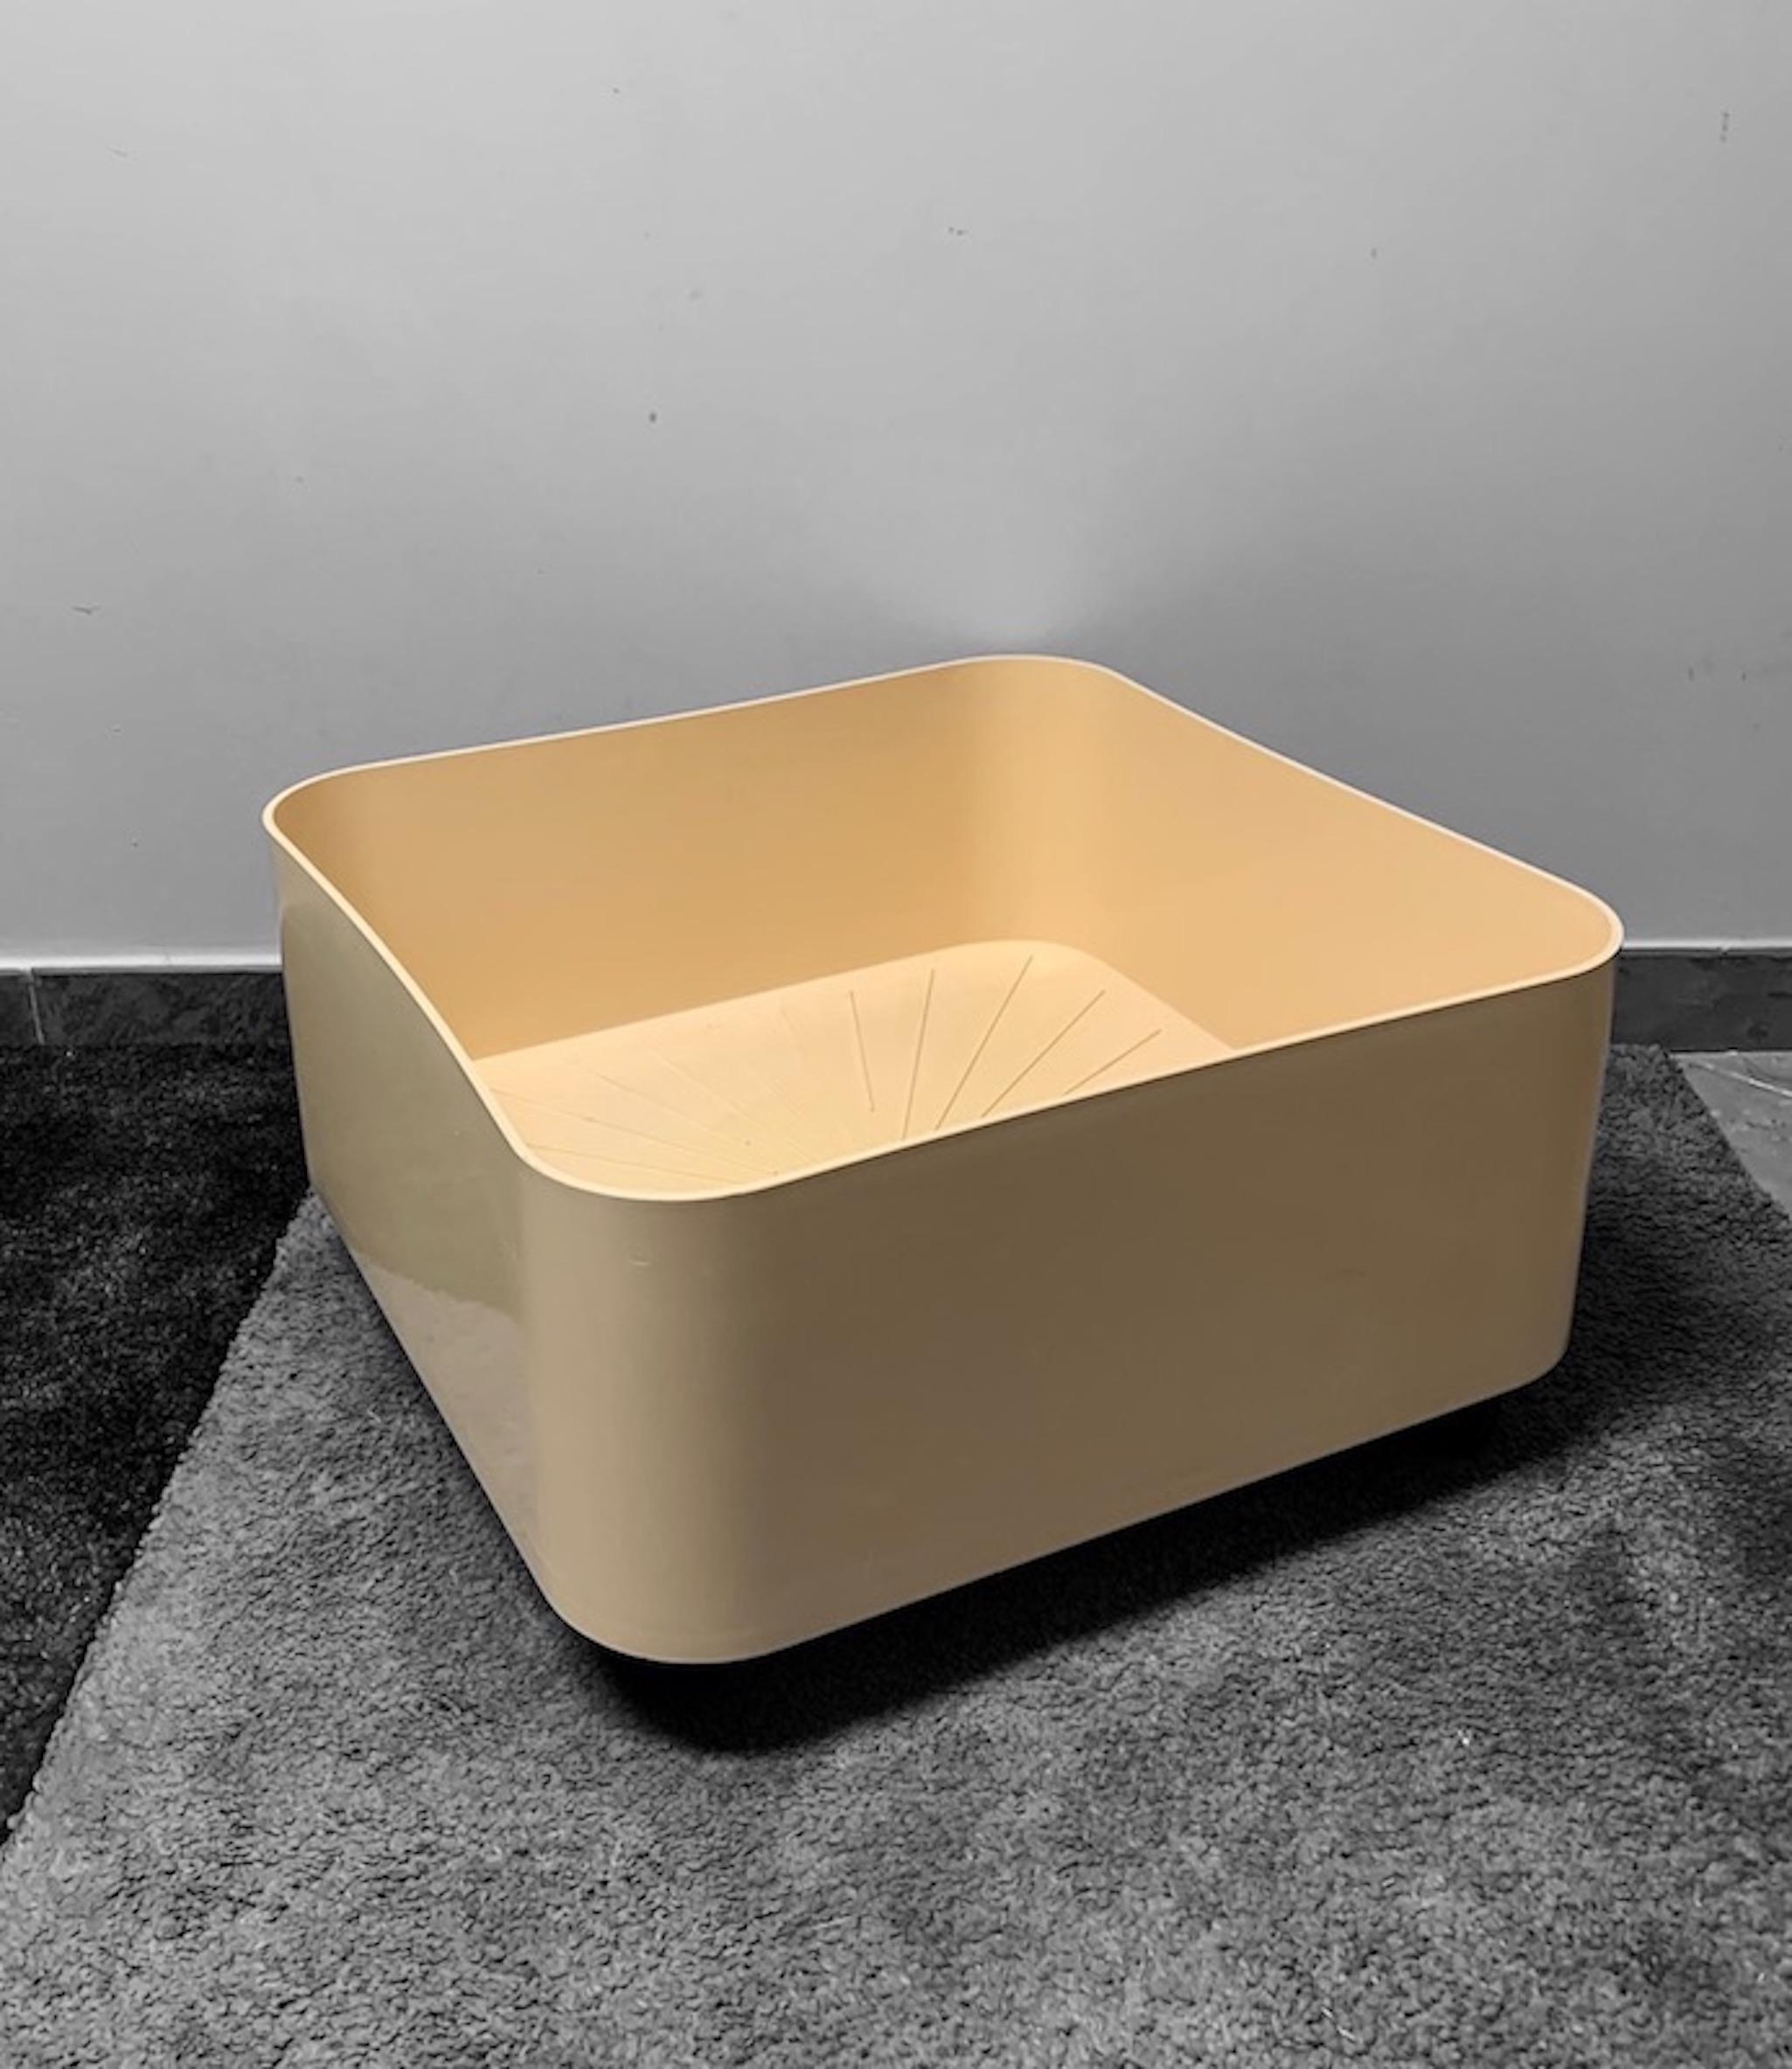 Minimalist Kartell Planter Container Model 4682 Componibili from Anna Castelli, 1960s For Sale